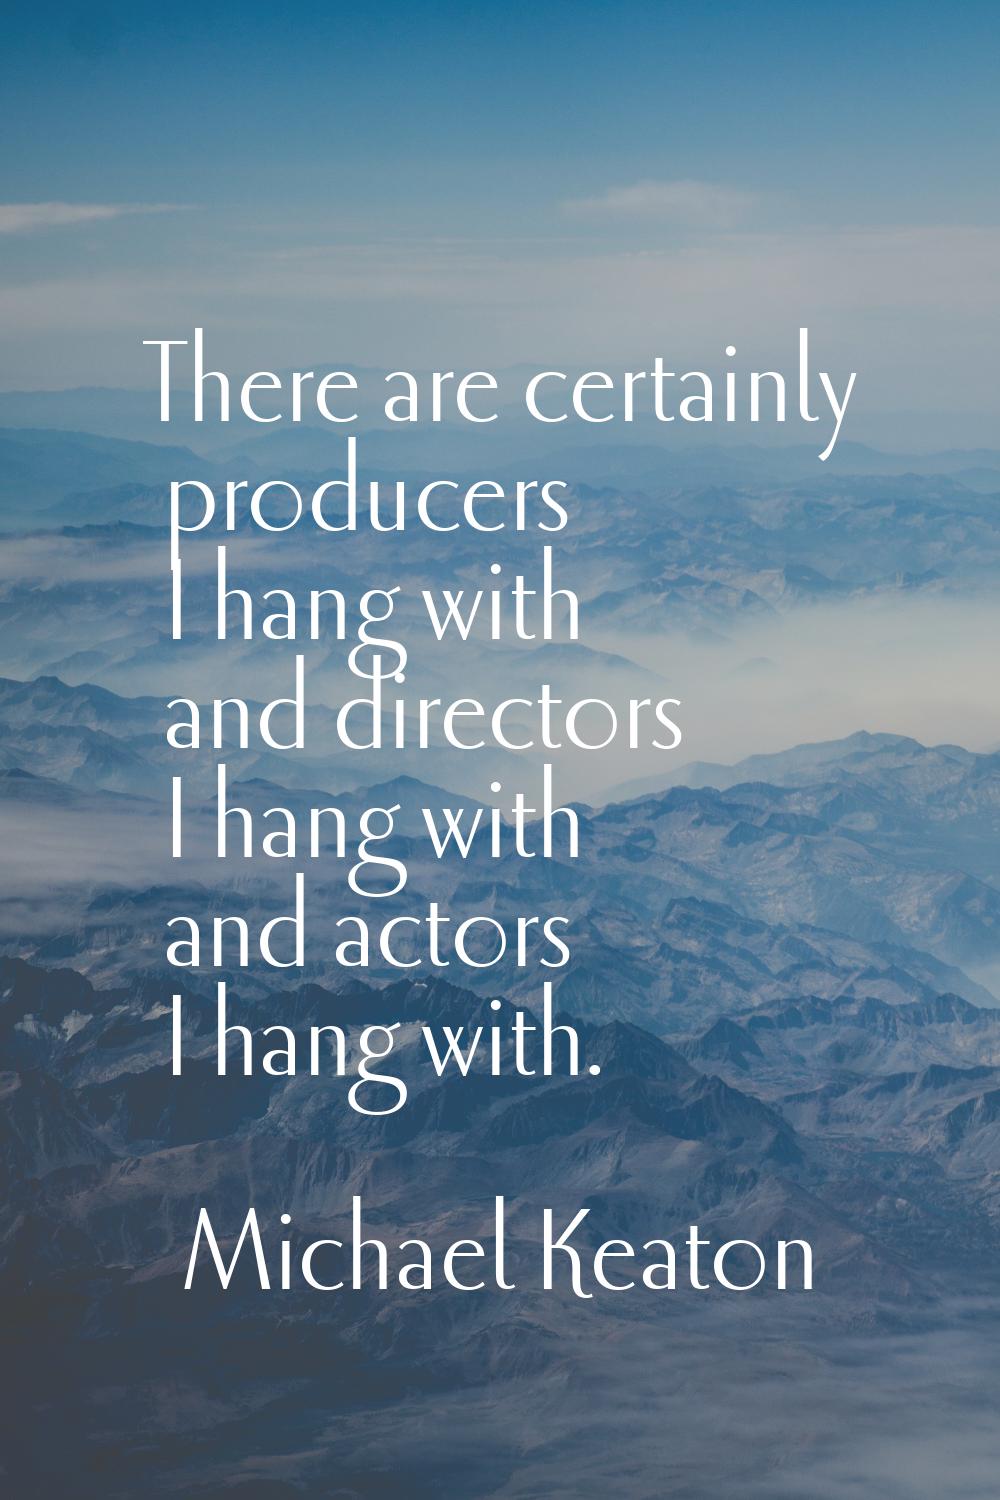 There are certainly producers I hang with and directors I hang with and actors I hang with.